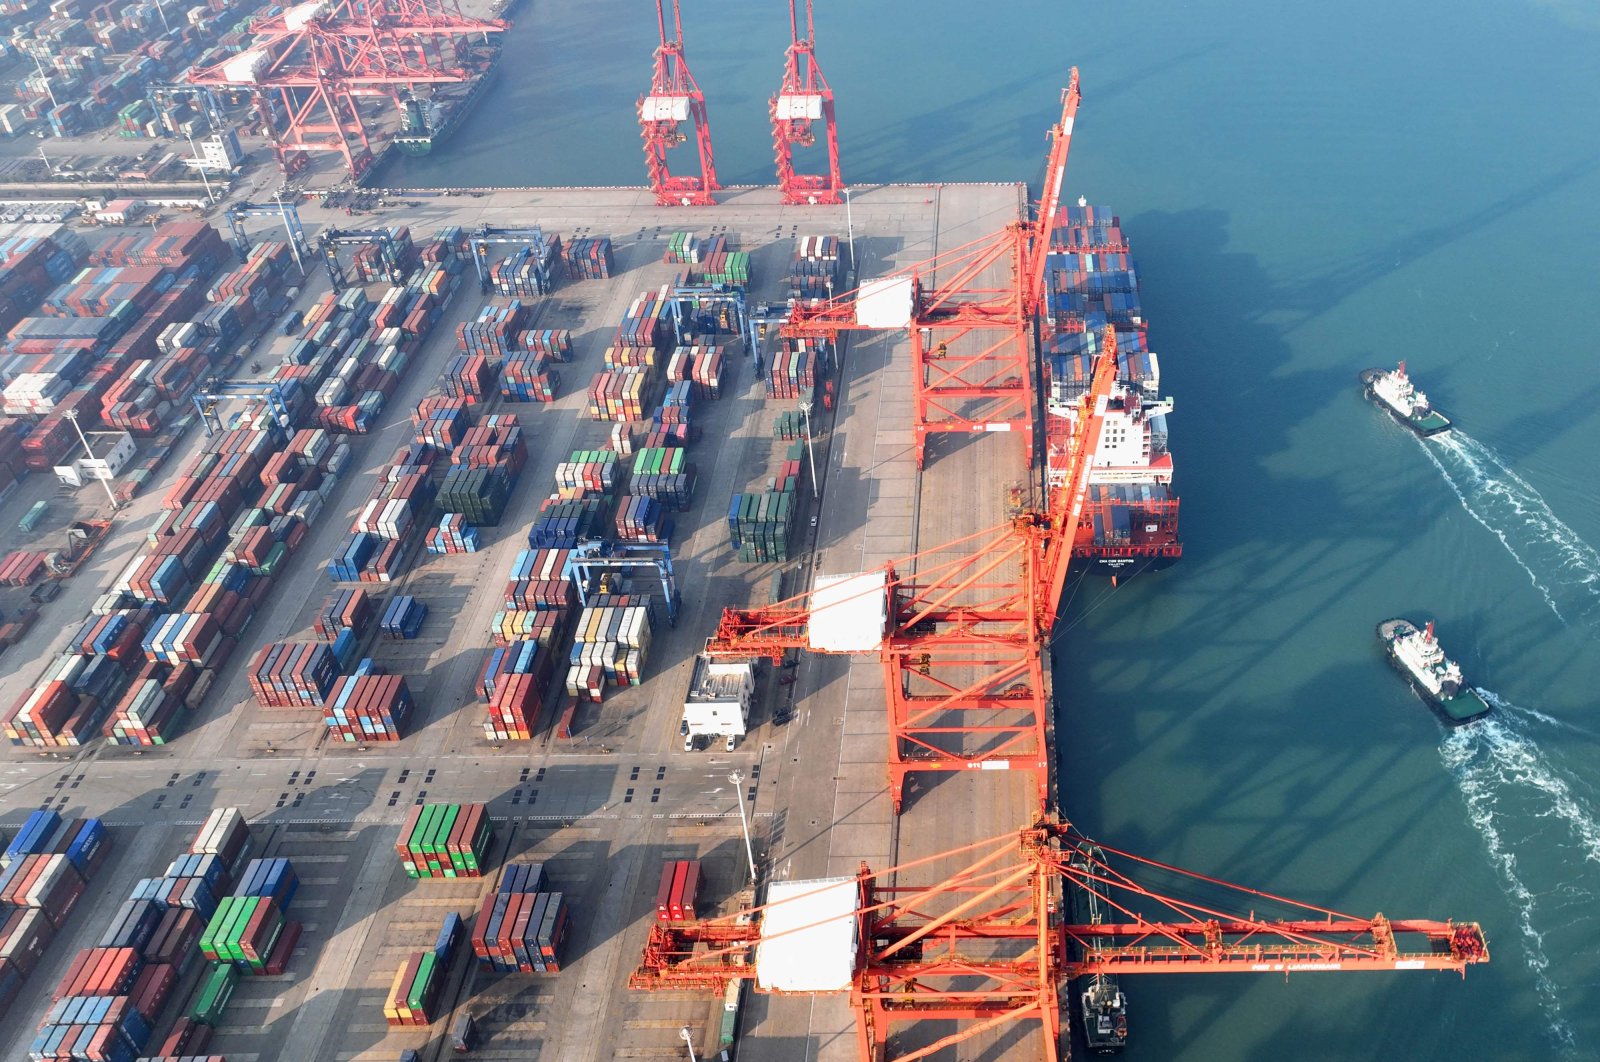 Cranes and shipping containers at a port in Lianyungang in Jiangsu province, eastern China, Dec. 7, 2022. (AFP Photo)